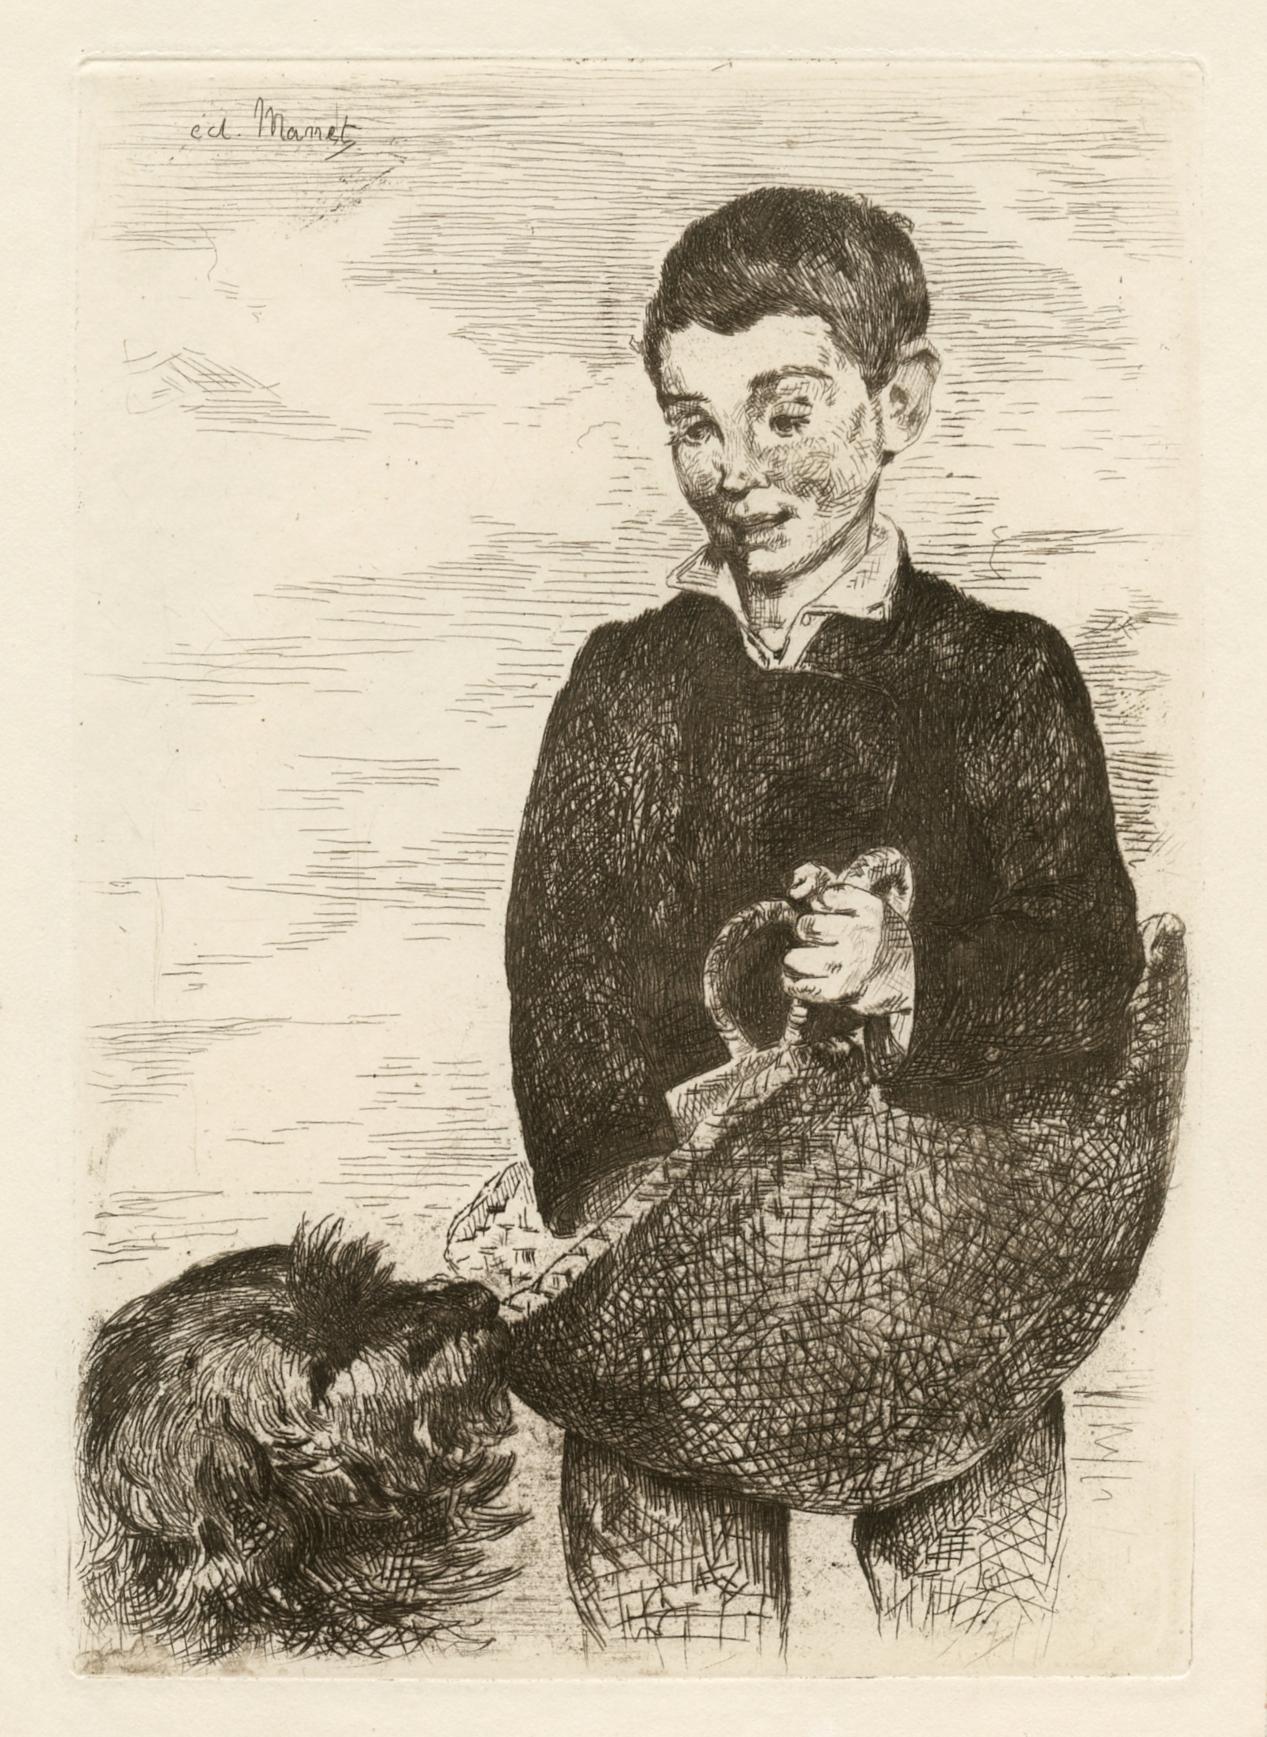 "Le Gamin" original etching - Boy with a Dog - Print by Edouard Manet